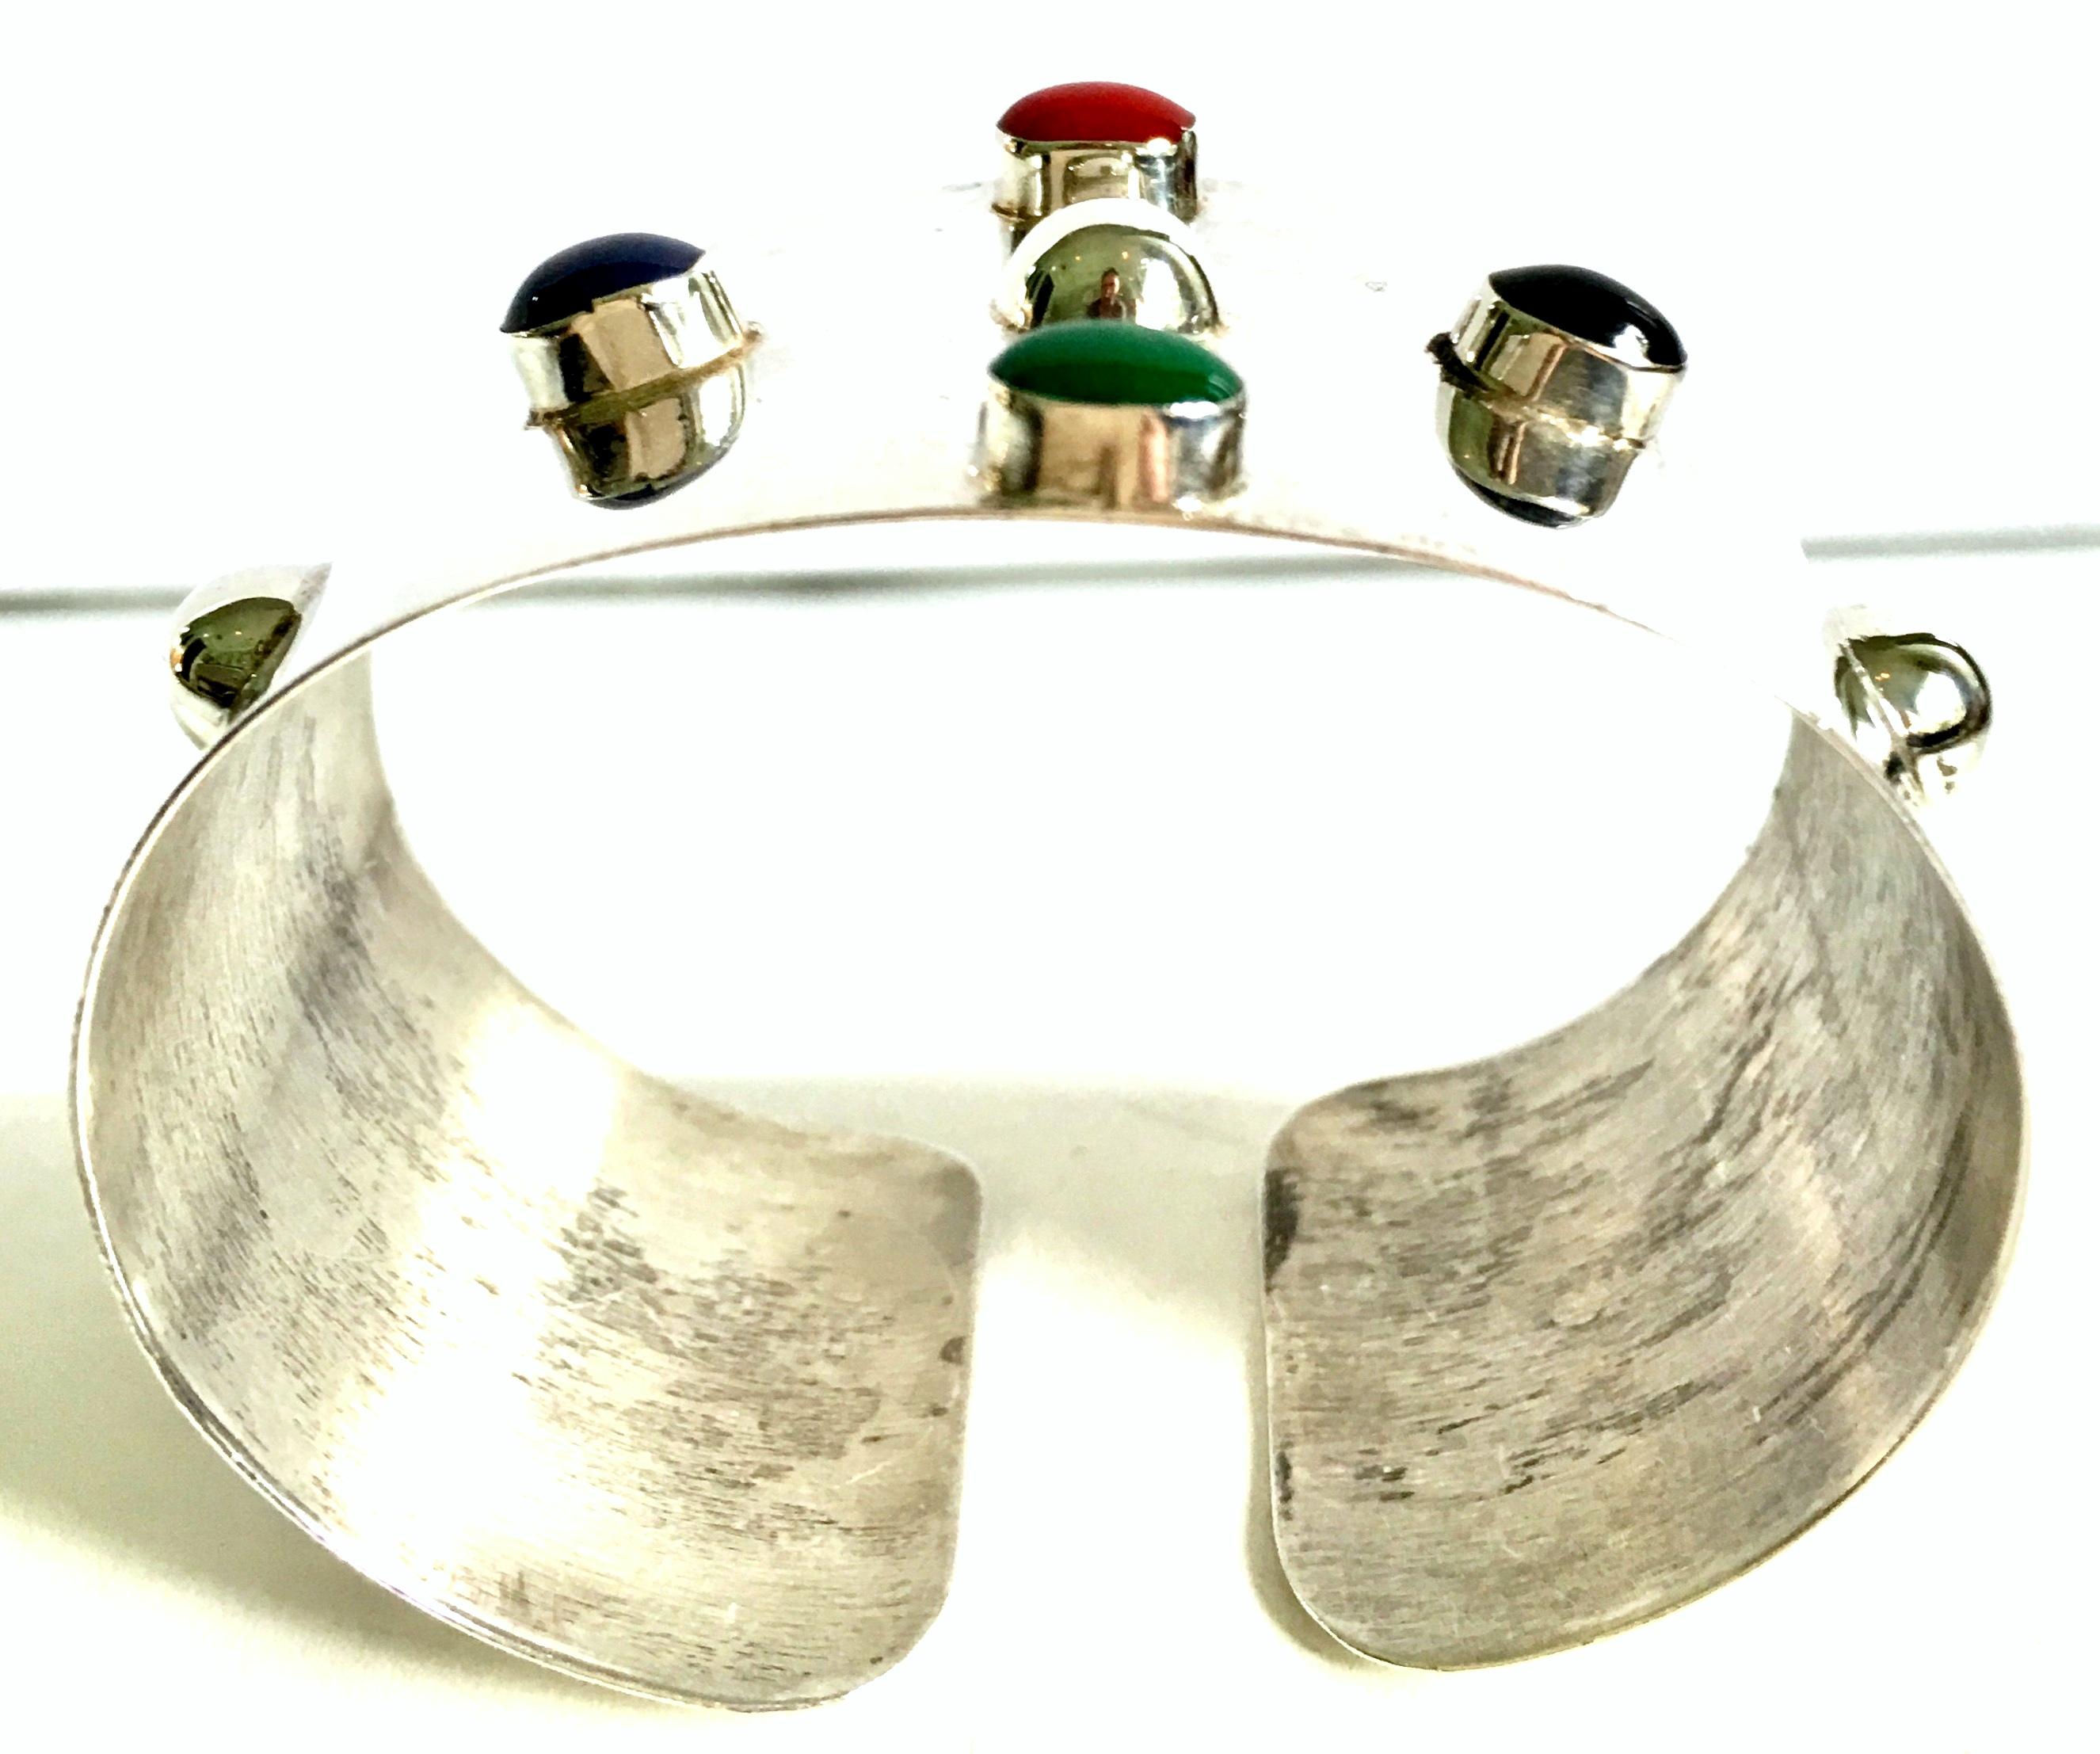 20th Century Taxco Mexico 925 Sterling & Semi Precious Stone Cuff Bracelet Signed by artist.
This lovely cuff features, malachite, onyx and carnelian semi precious bezel set stones. Each stone is approximately, .25